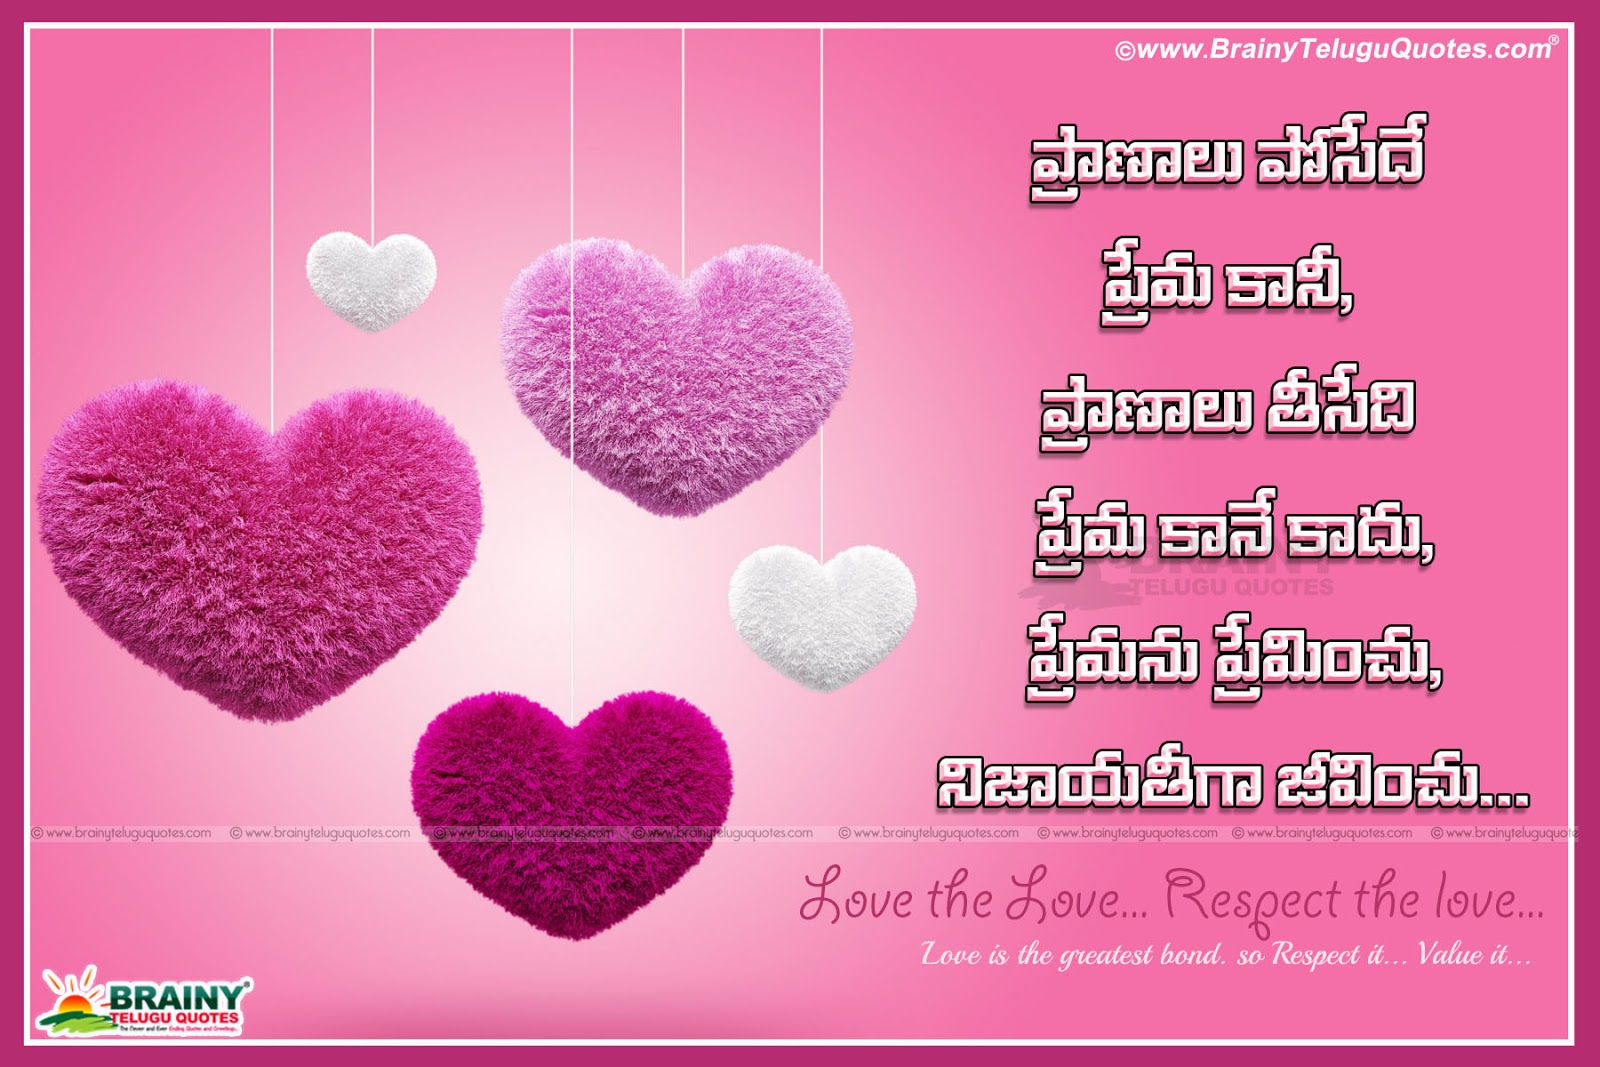 Heart Touching Love Meaning Feeling Telugu Quotes